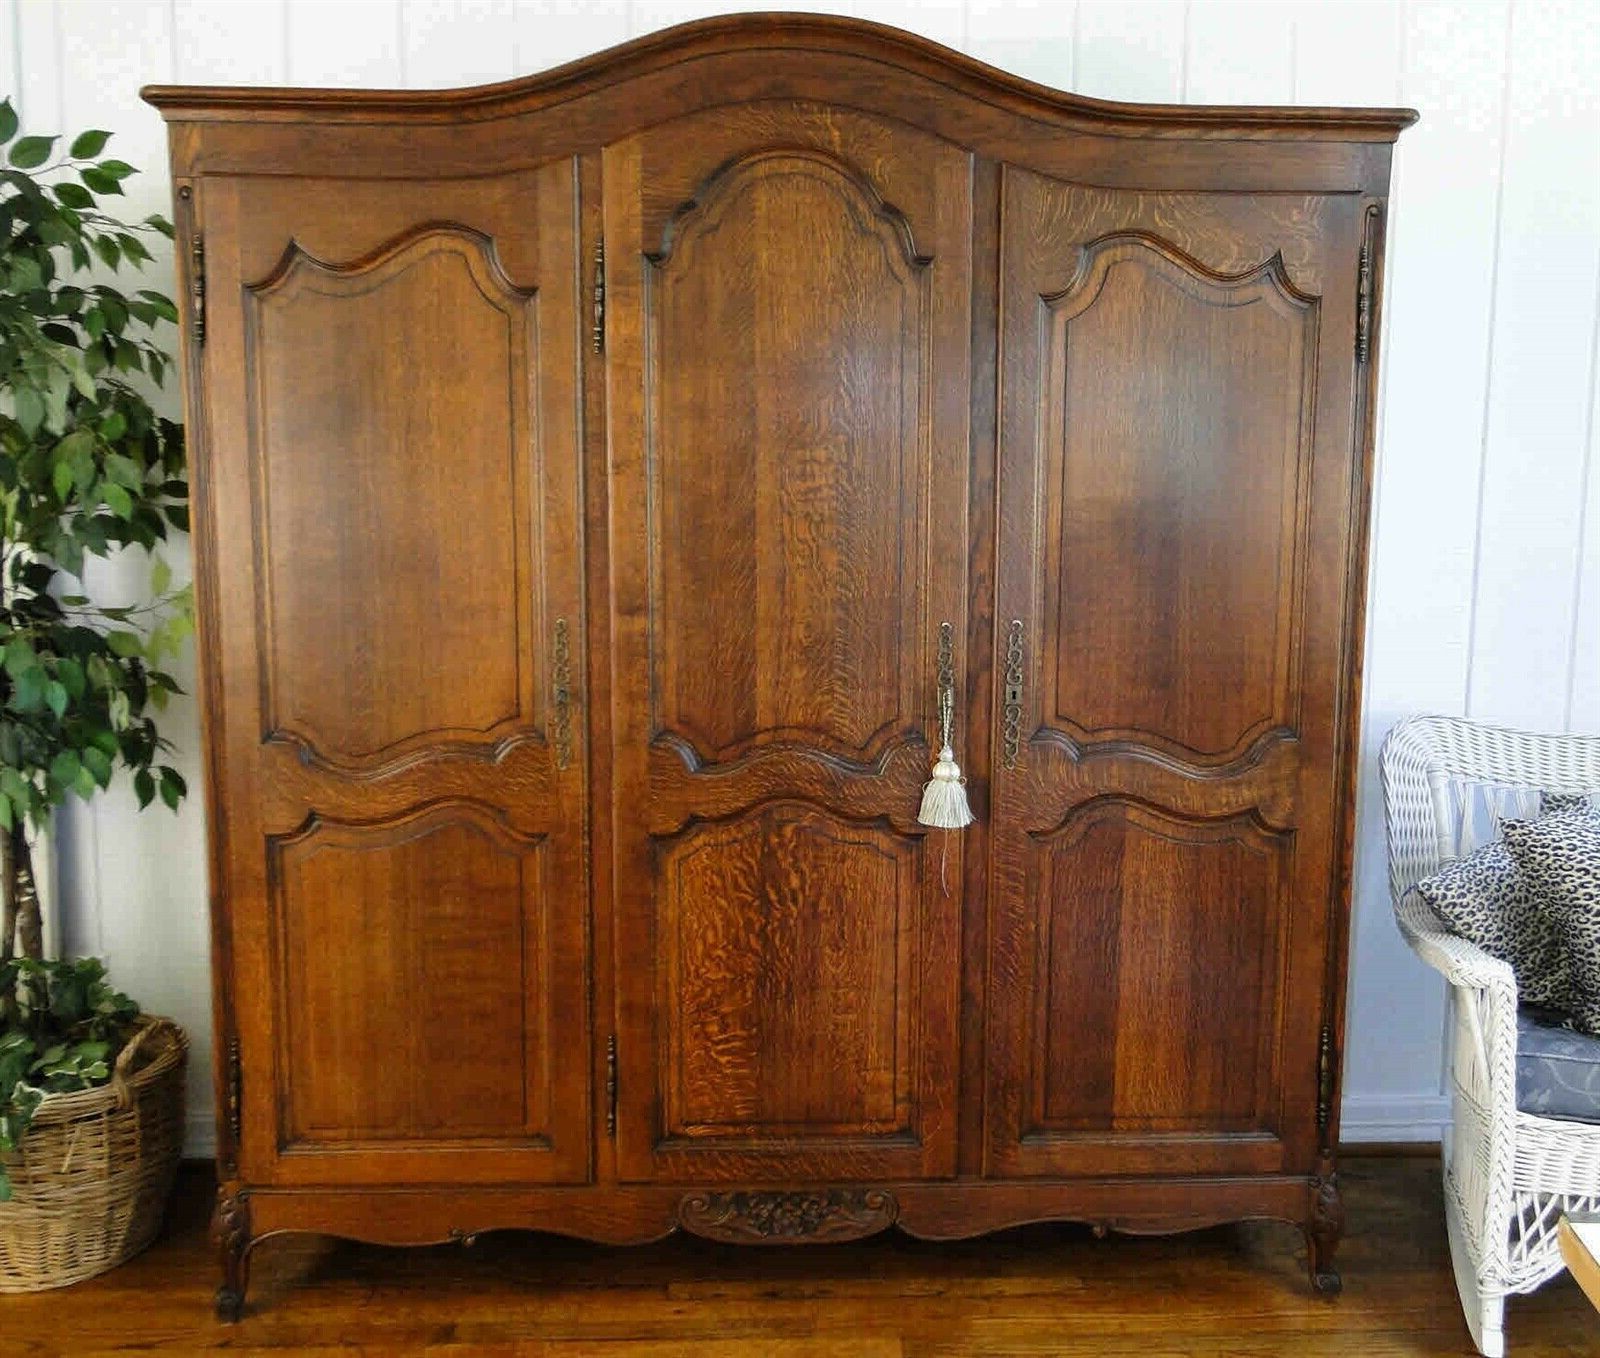 Antique French Country Wardrobe Tiger Oak Armoire 3 Door Shelves Hanging Rod Throughout Vintage French Wardrobes (View 15 of 20)